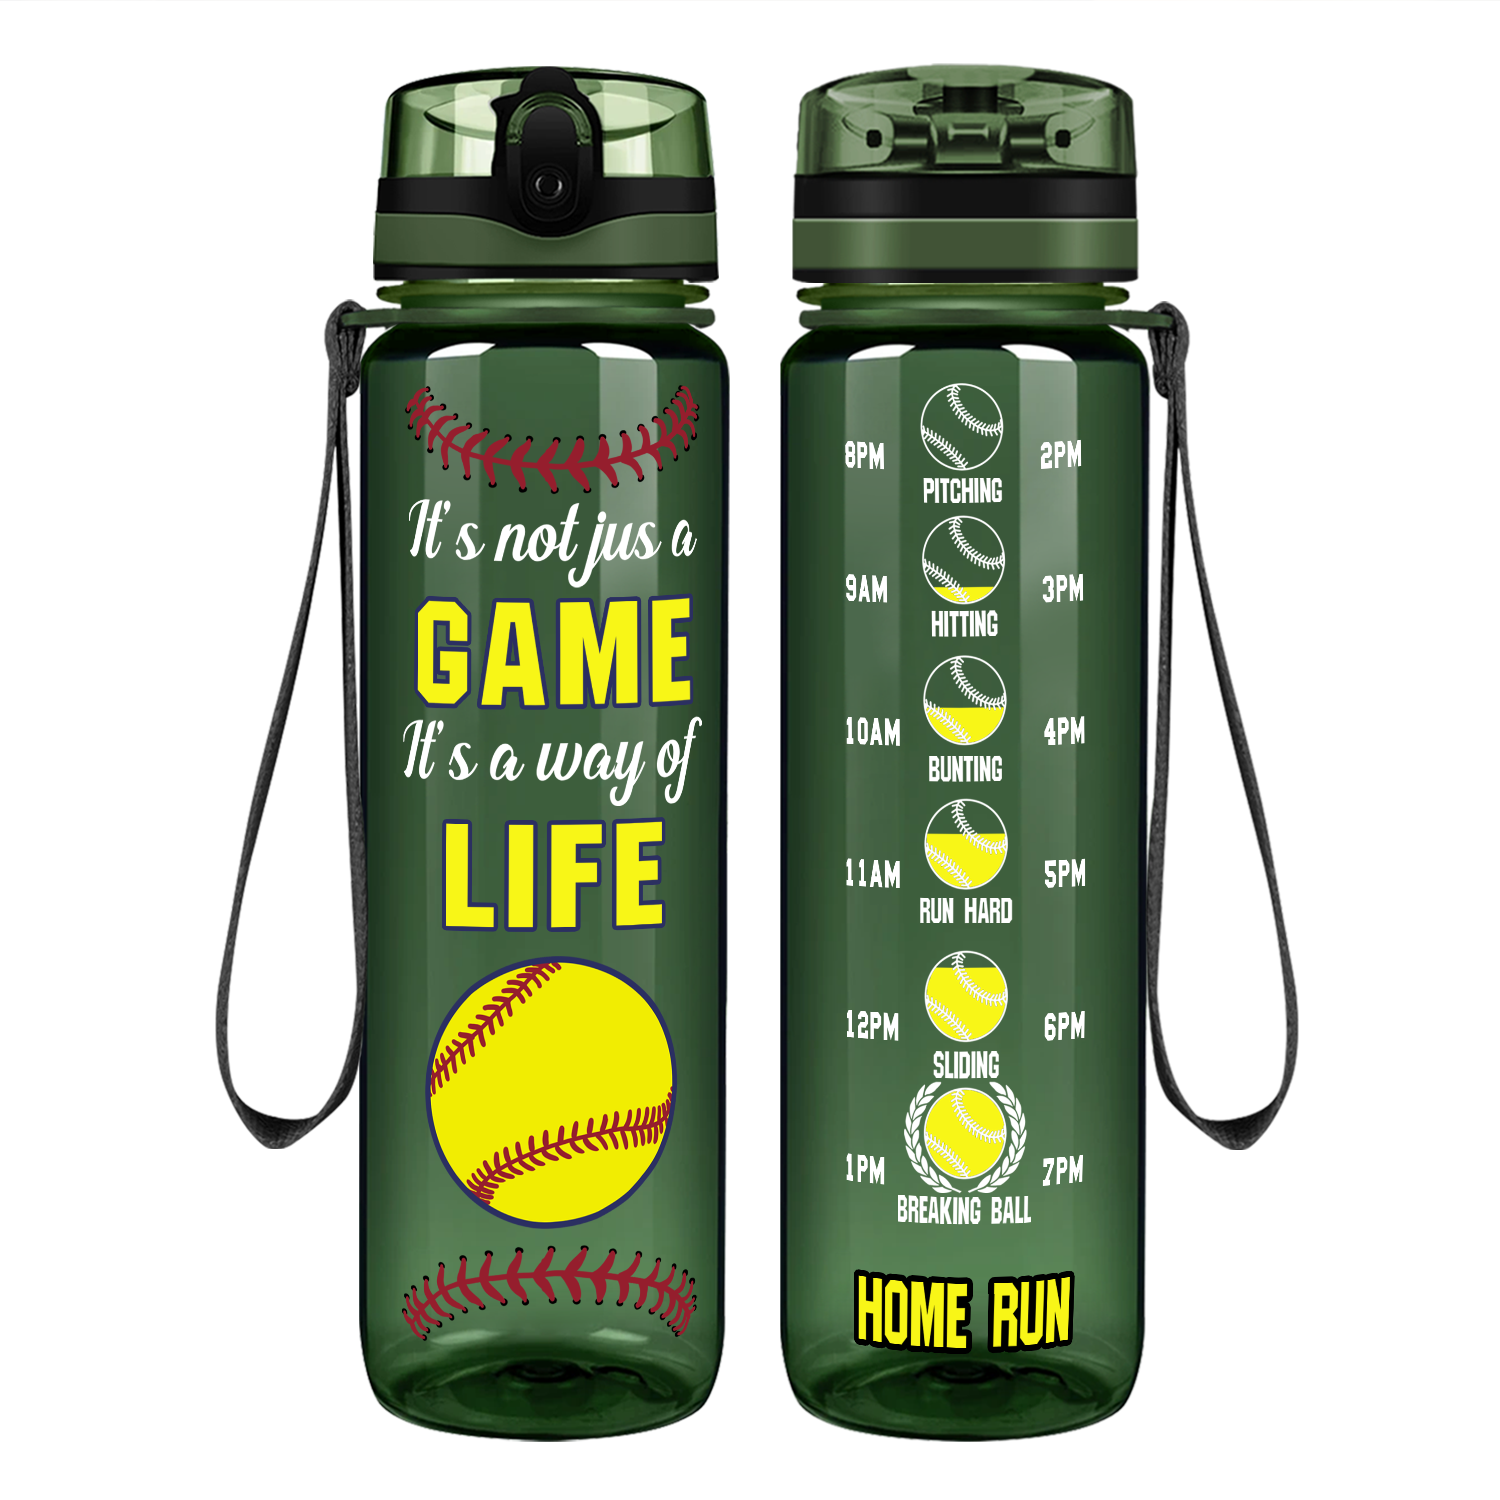 It's Not Just a Game It's a Way of Life on 32 oz Motivational Tracking Water Bottle